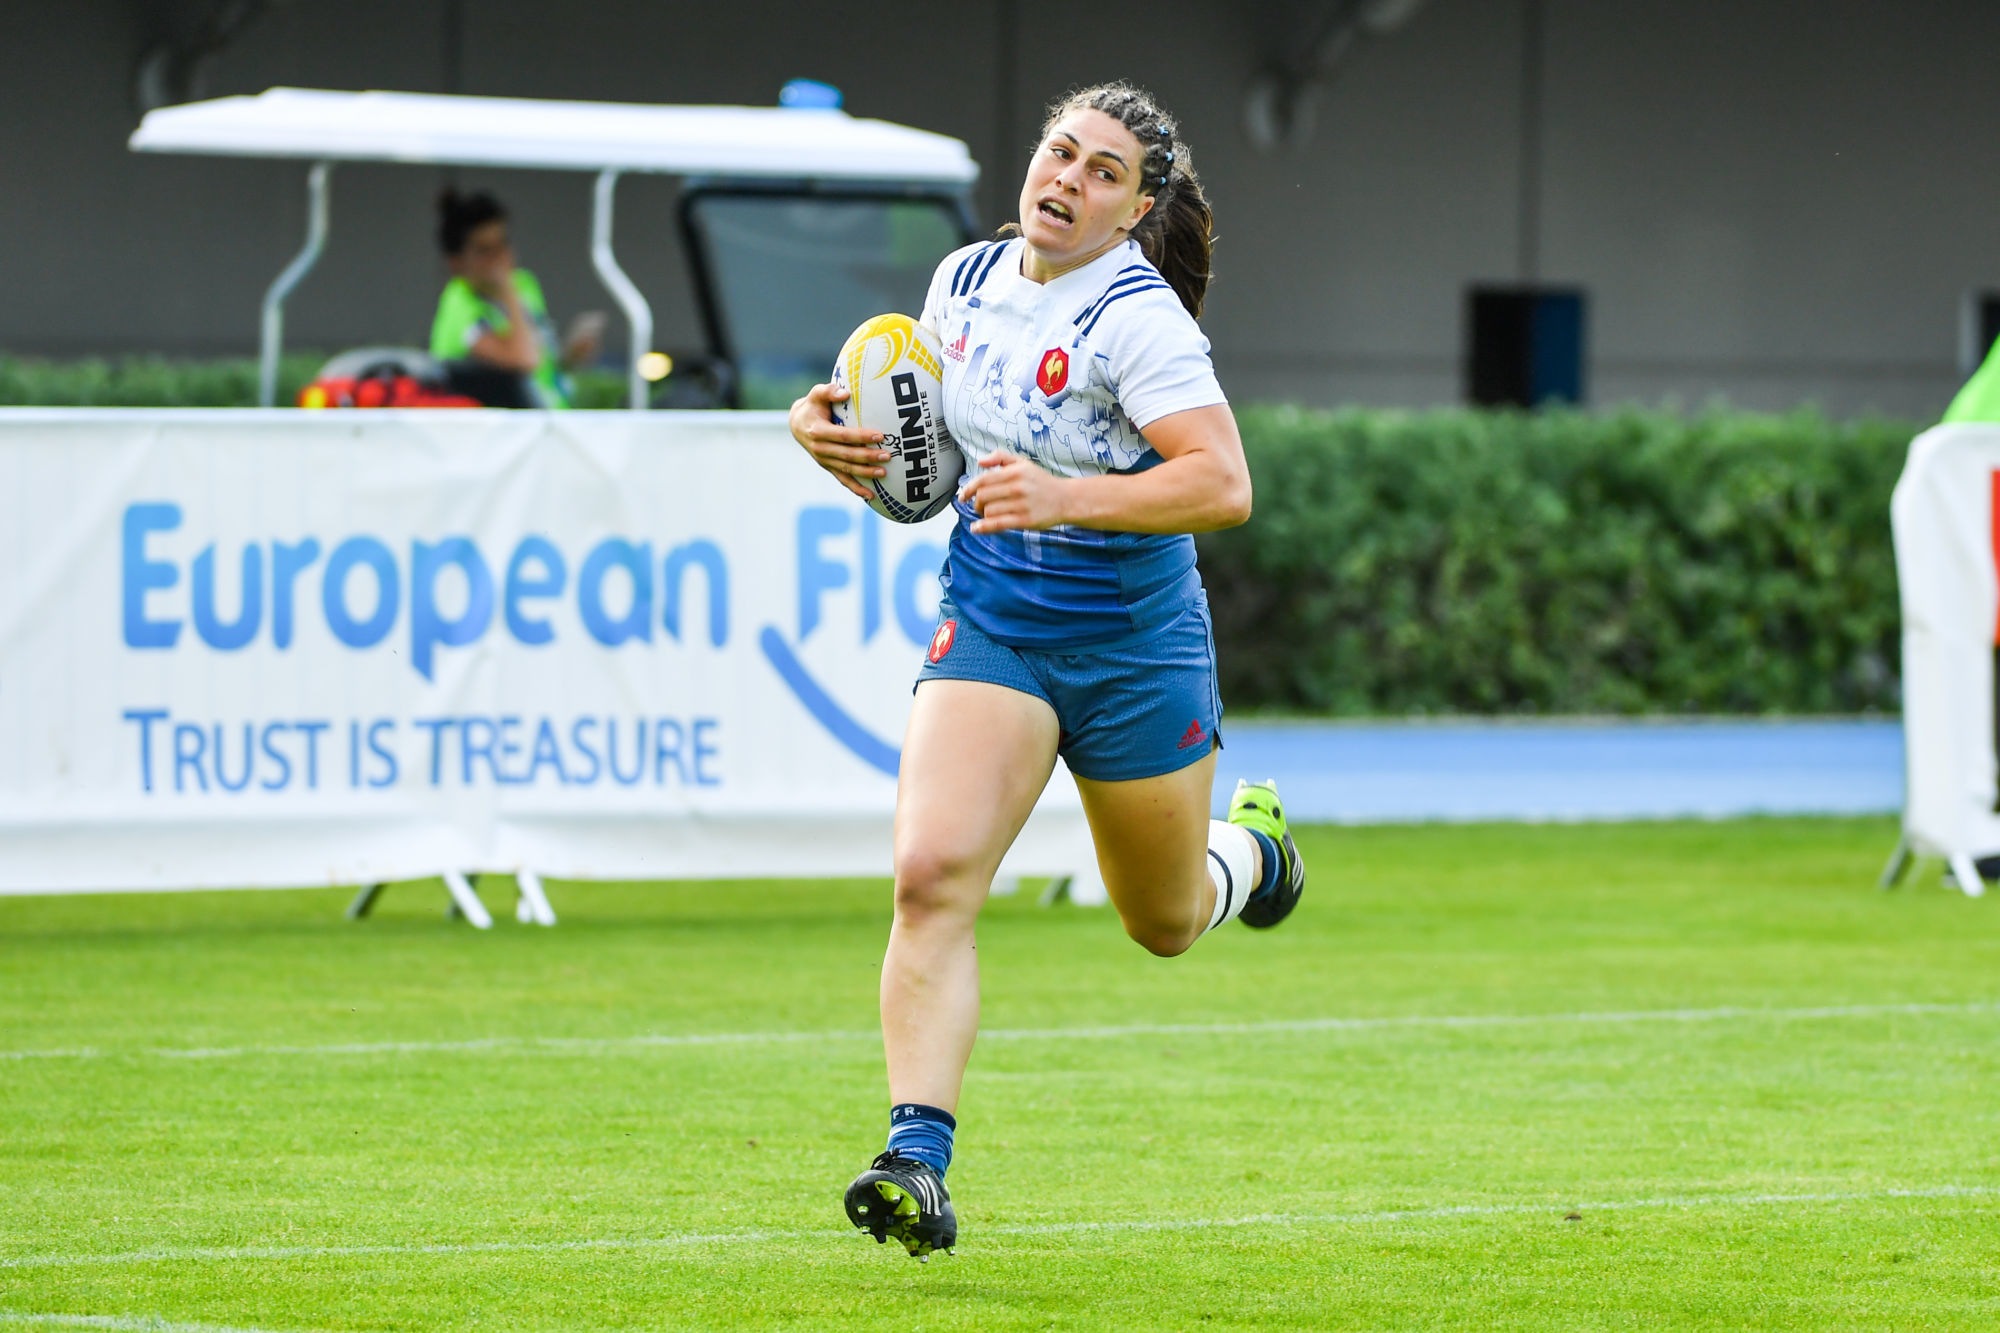 Chloe Pelle of France runs to score a try during the Grand Prix Series - Rugby Seven match between France and England on June 29, 2018 in Marcoussis, France. (Photo by Sandra Ruhaut/Icon Sport)